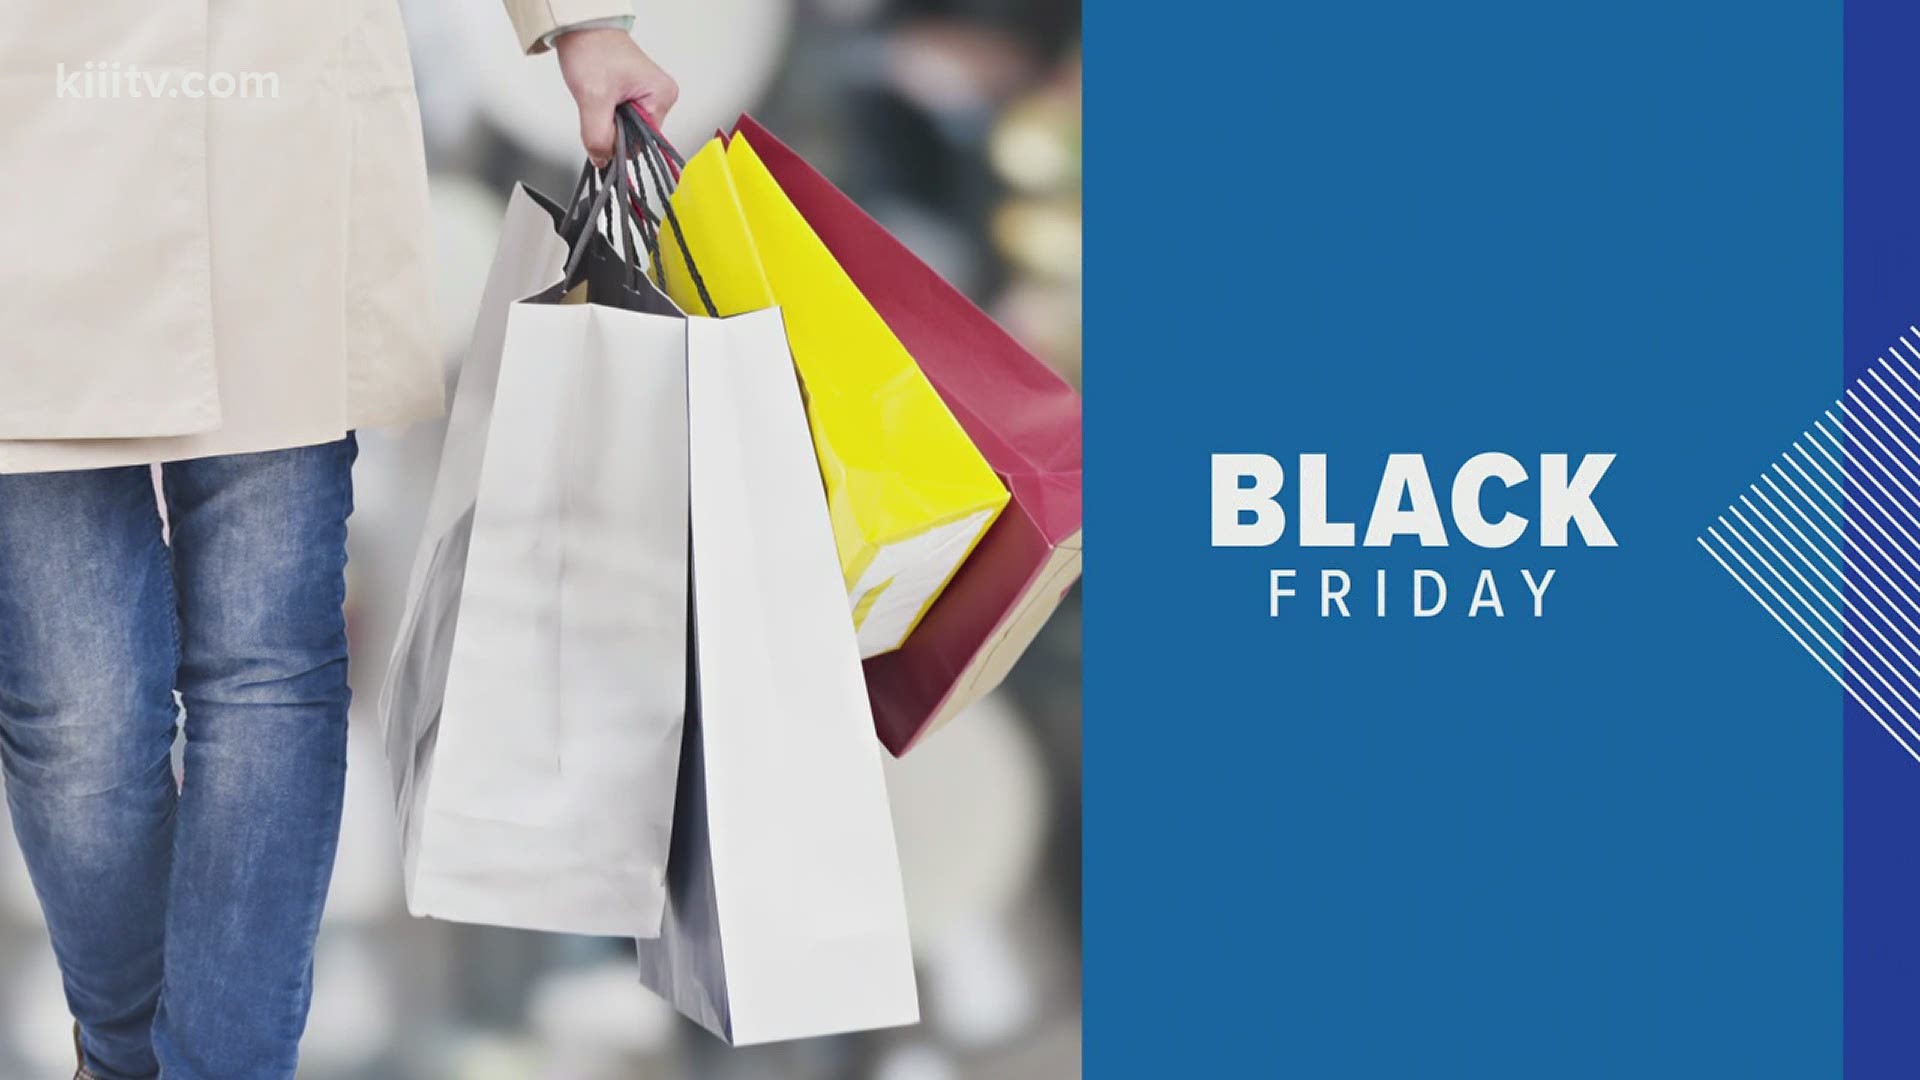 Several stores are limiting their hours this Black Friday.